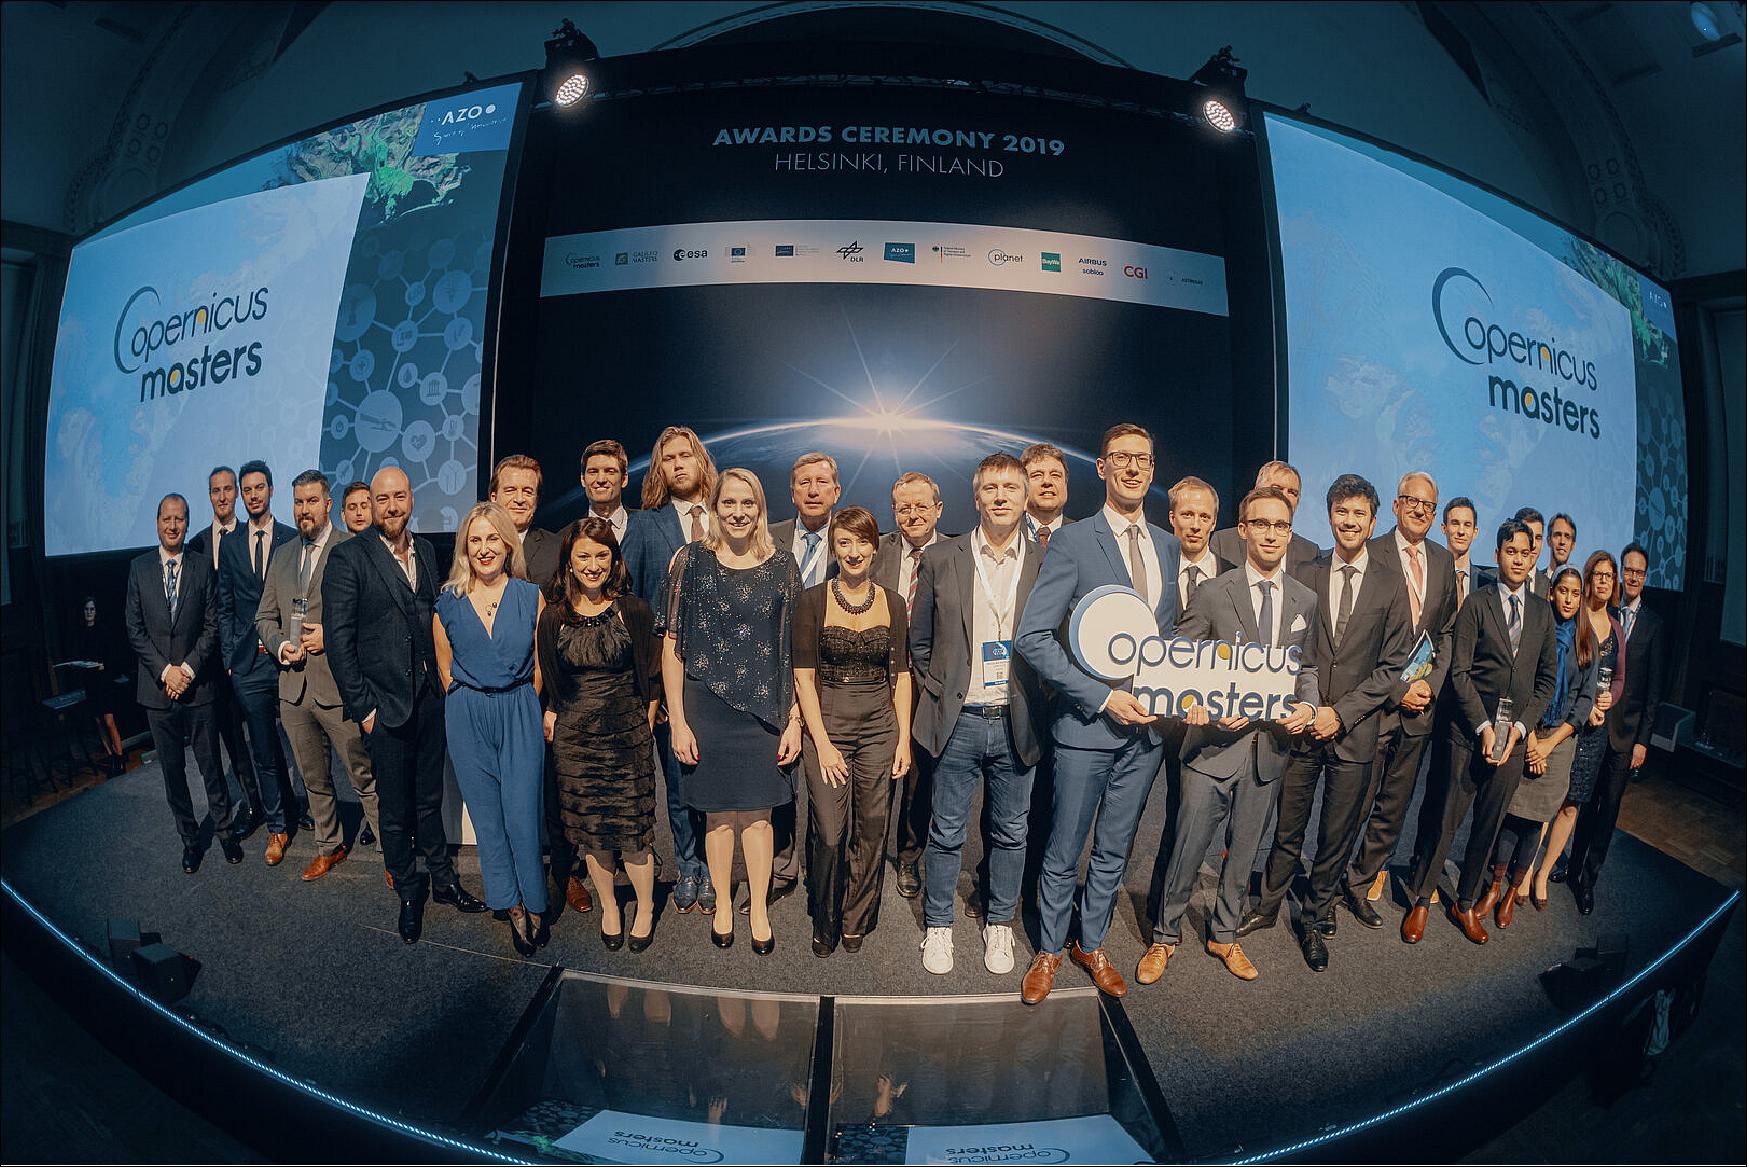 Figure 8: The victorious group of the 2019 edition of the Copernicus Masters took home prizes worth more than € 450,000 in total. These included cash, consulting, data packages and other assistance, designed to help the winners refine their ideas for a possible market launch at one of ESA’s BICs (Business Incubation Centers), image credit: AZO)